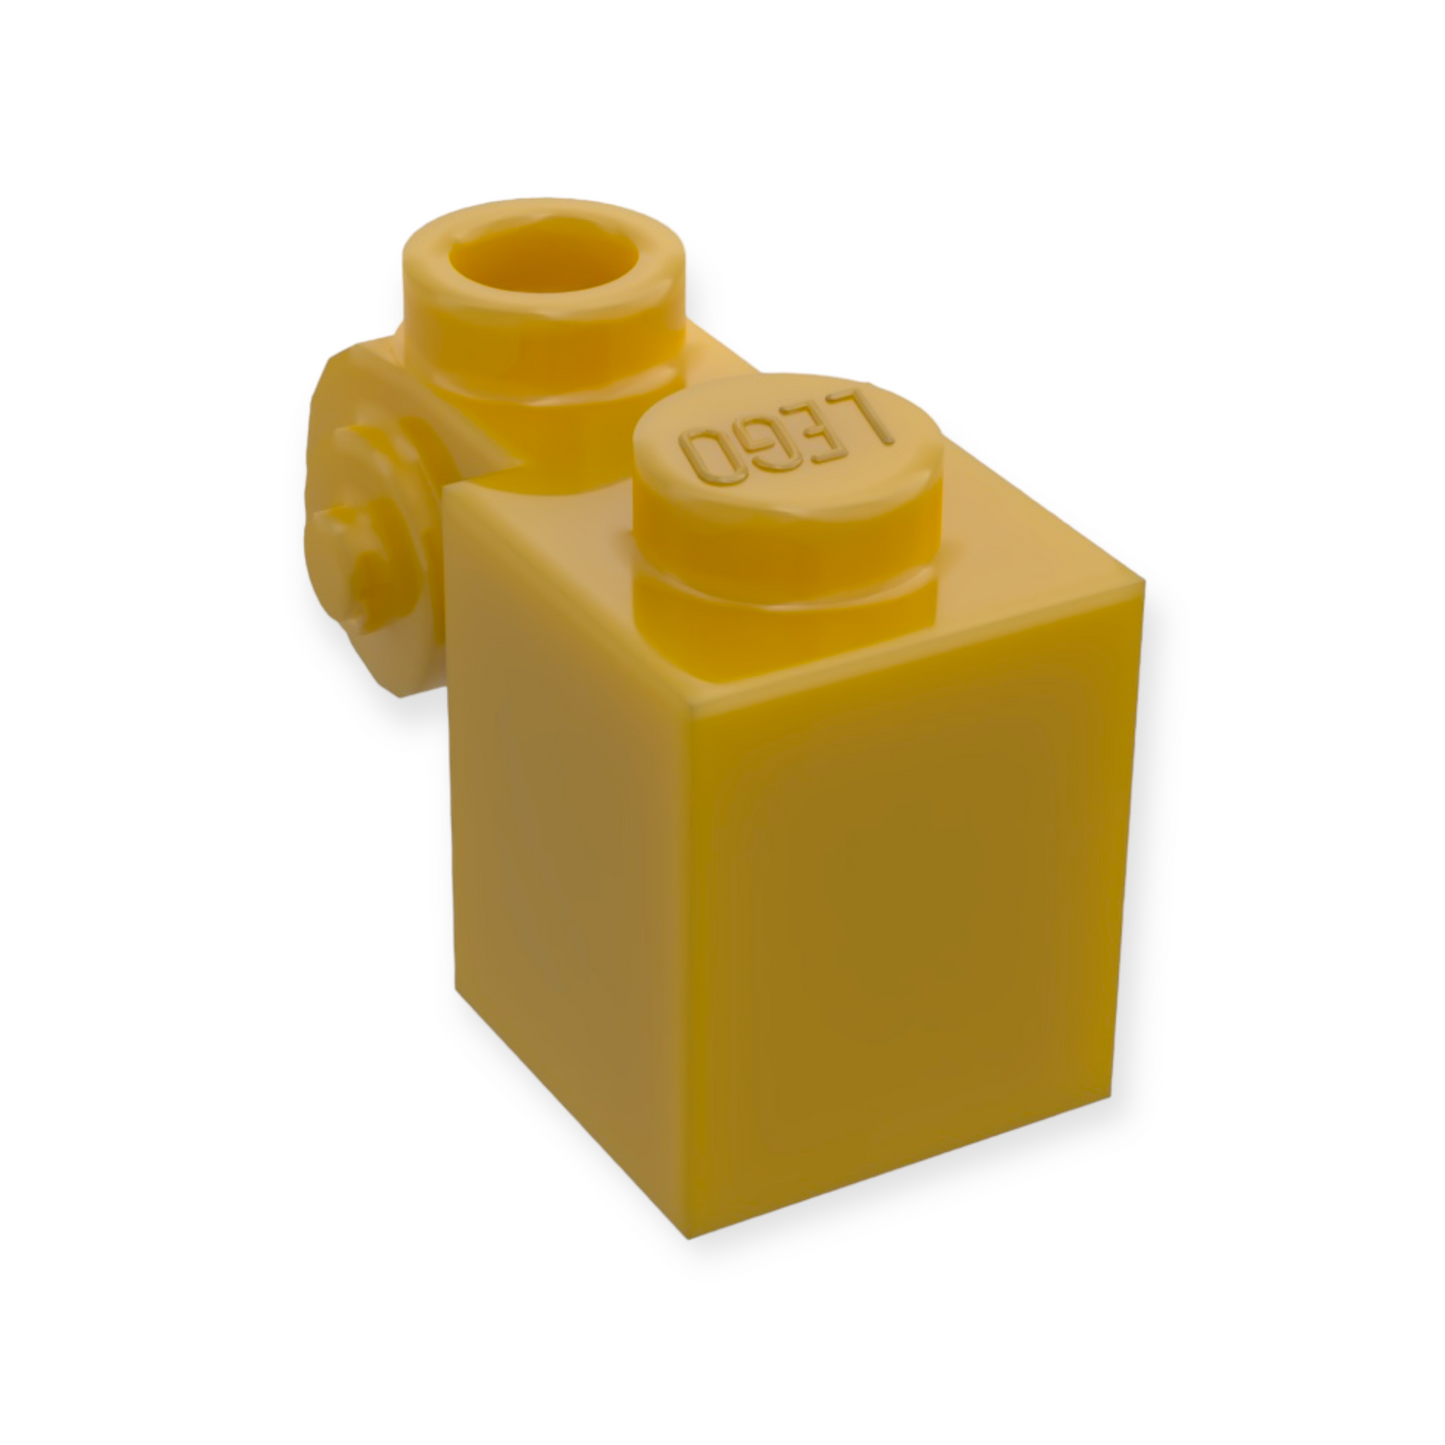 LEGO Brick Modified 1x1 - Scroll with Hollow Stud / Verzierung in Pearl Gold